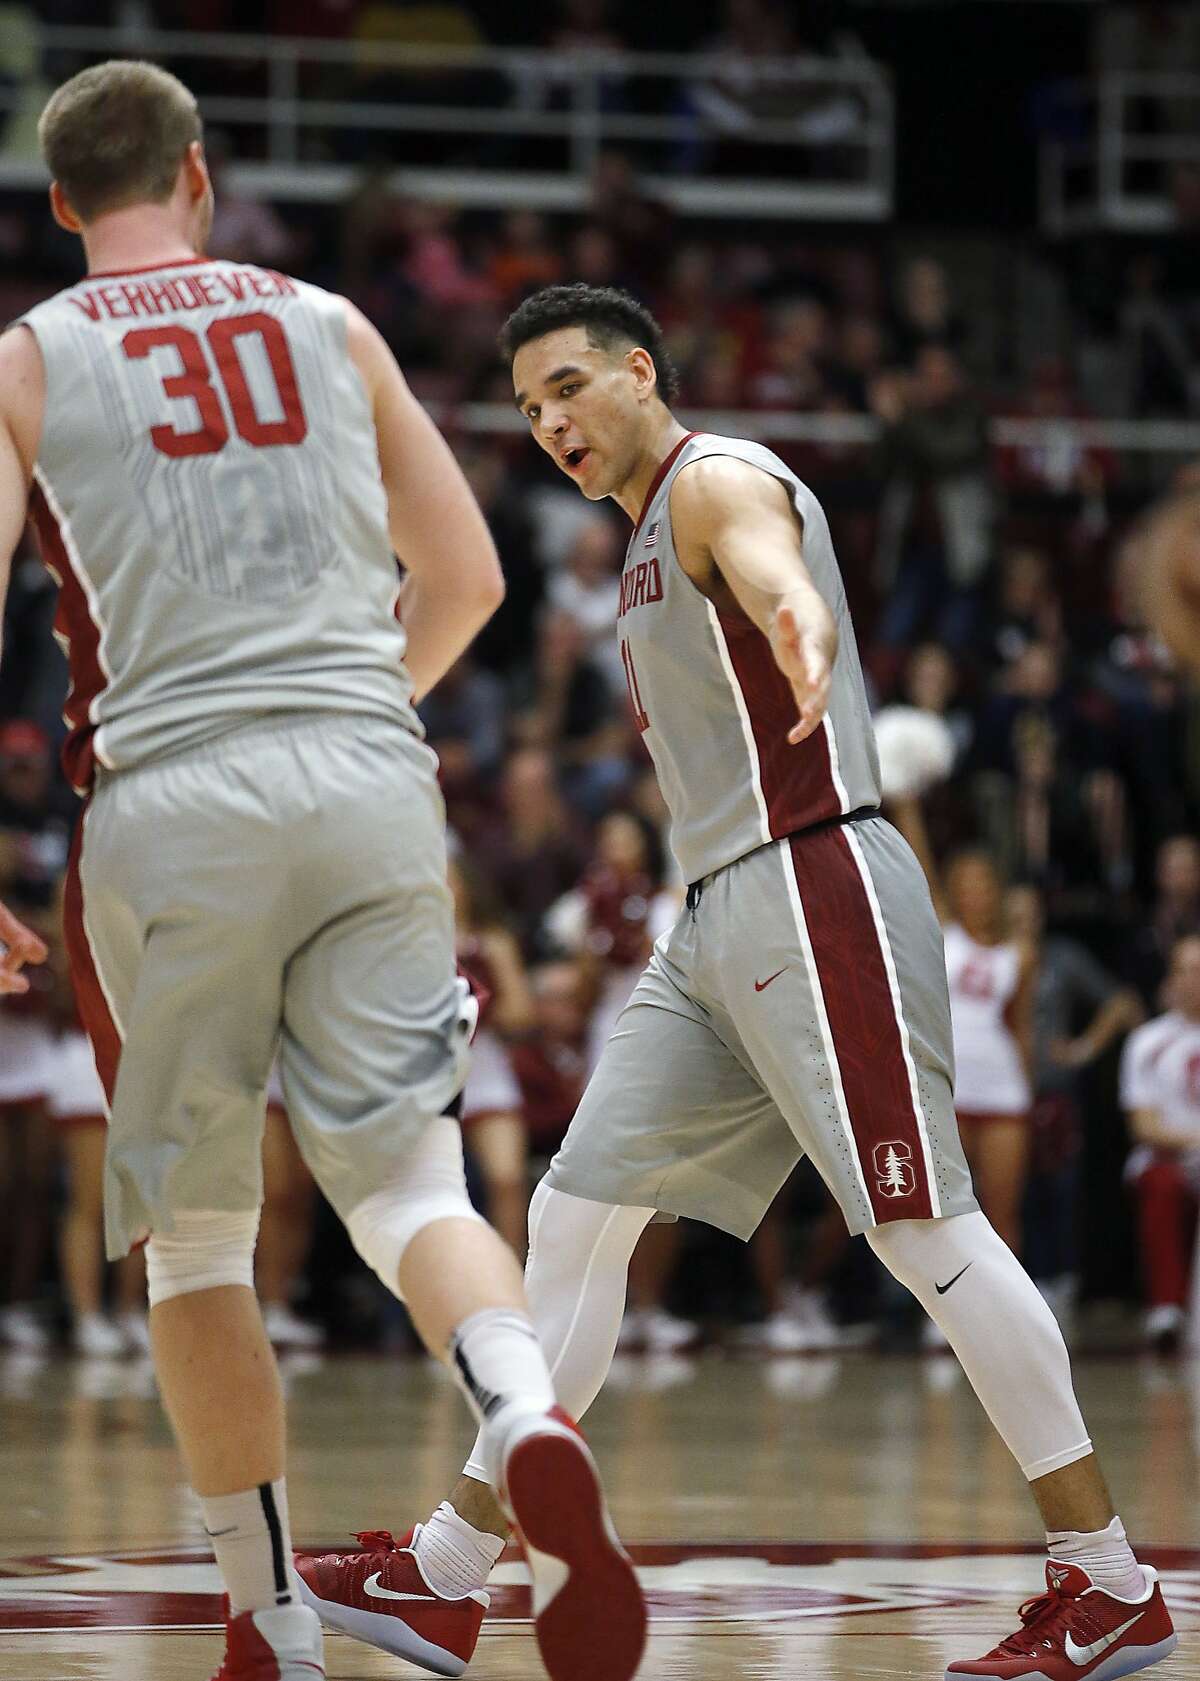 Stanford guard Dorian Pickens, right, celebrates with Grant Verhoeven (30) after scoring a 3-point shot against California during the second half of an NCAA college basketball game Friday, Feb. 17, 2017, in Stanford, Calif. Stanford won 73-68. (AP Photo/Tony Avelar)